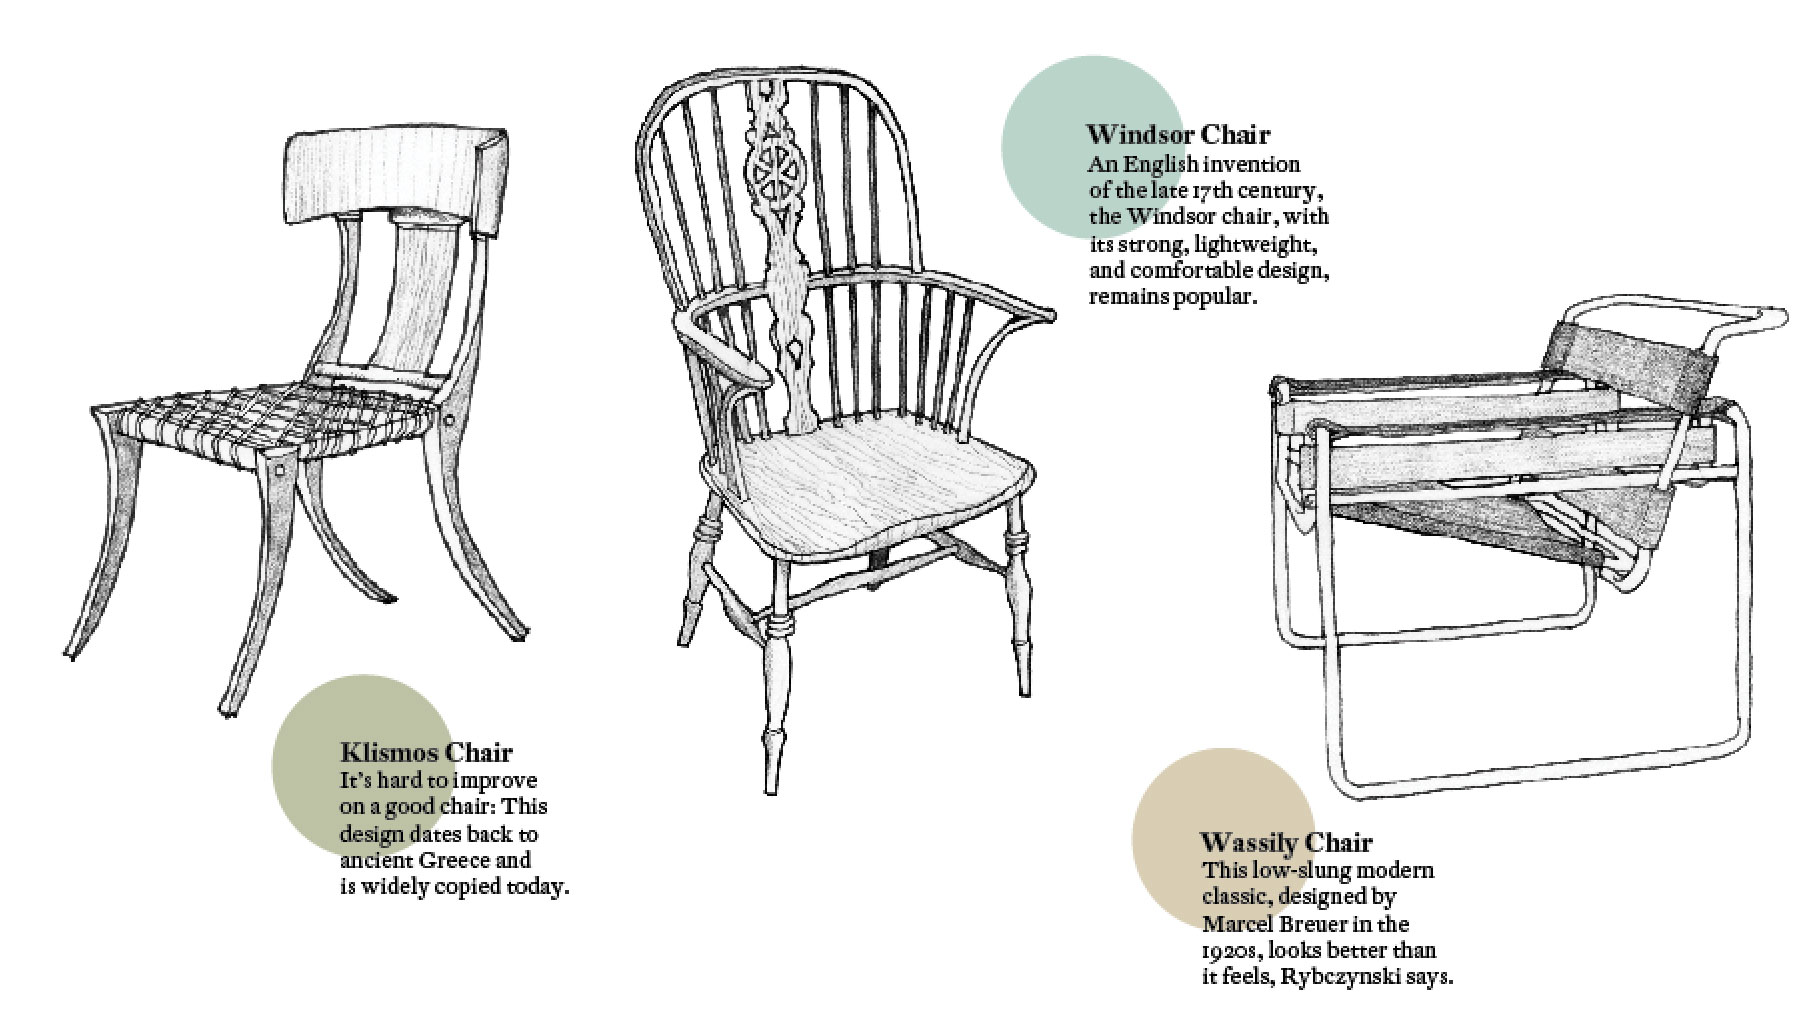 Klismos, Windsor, and Wassily chairs